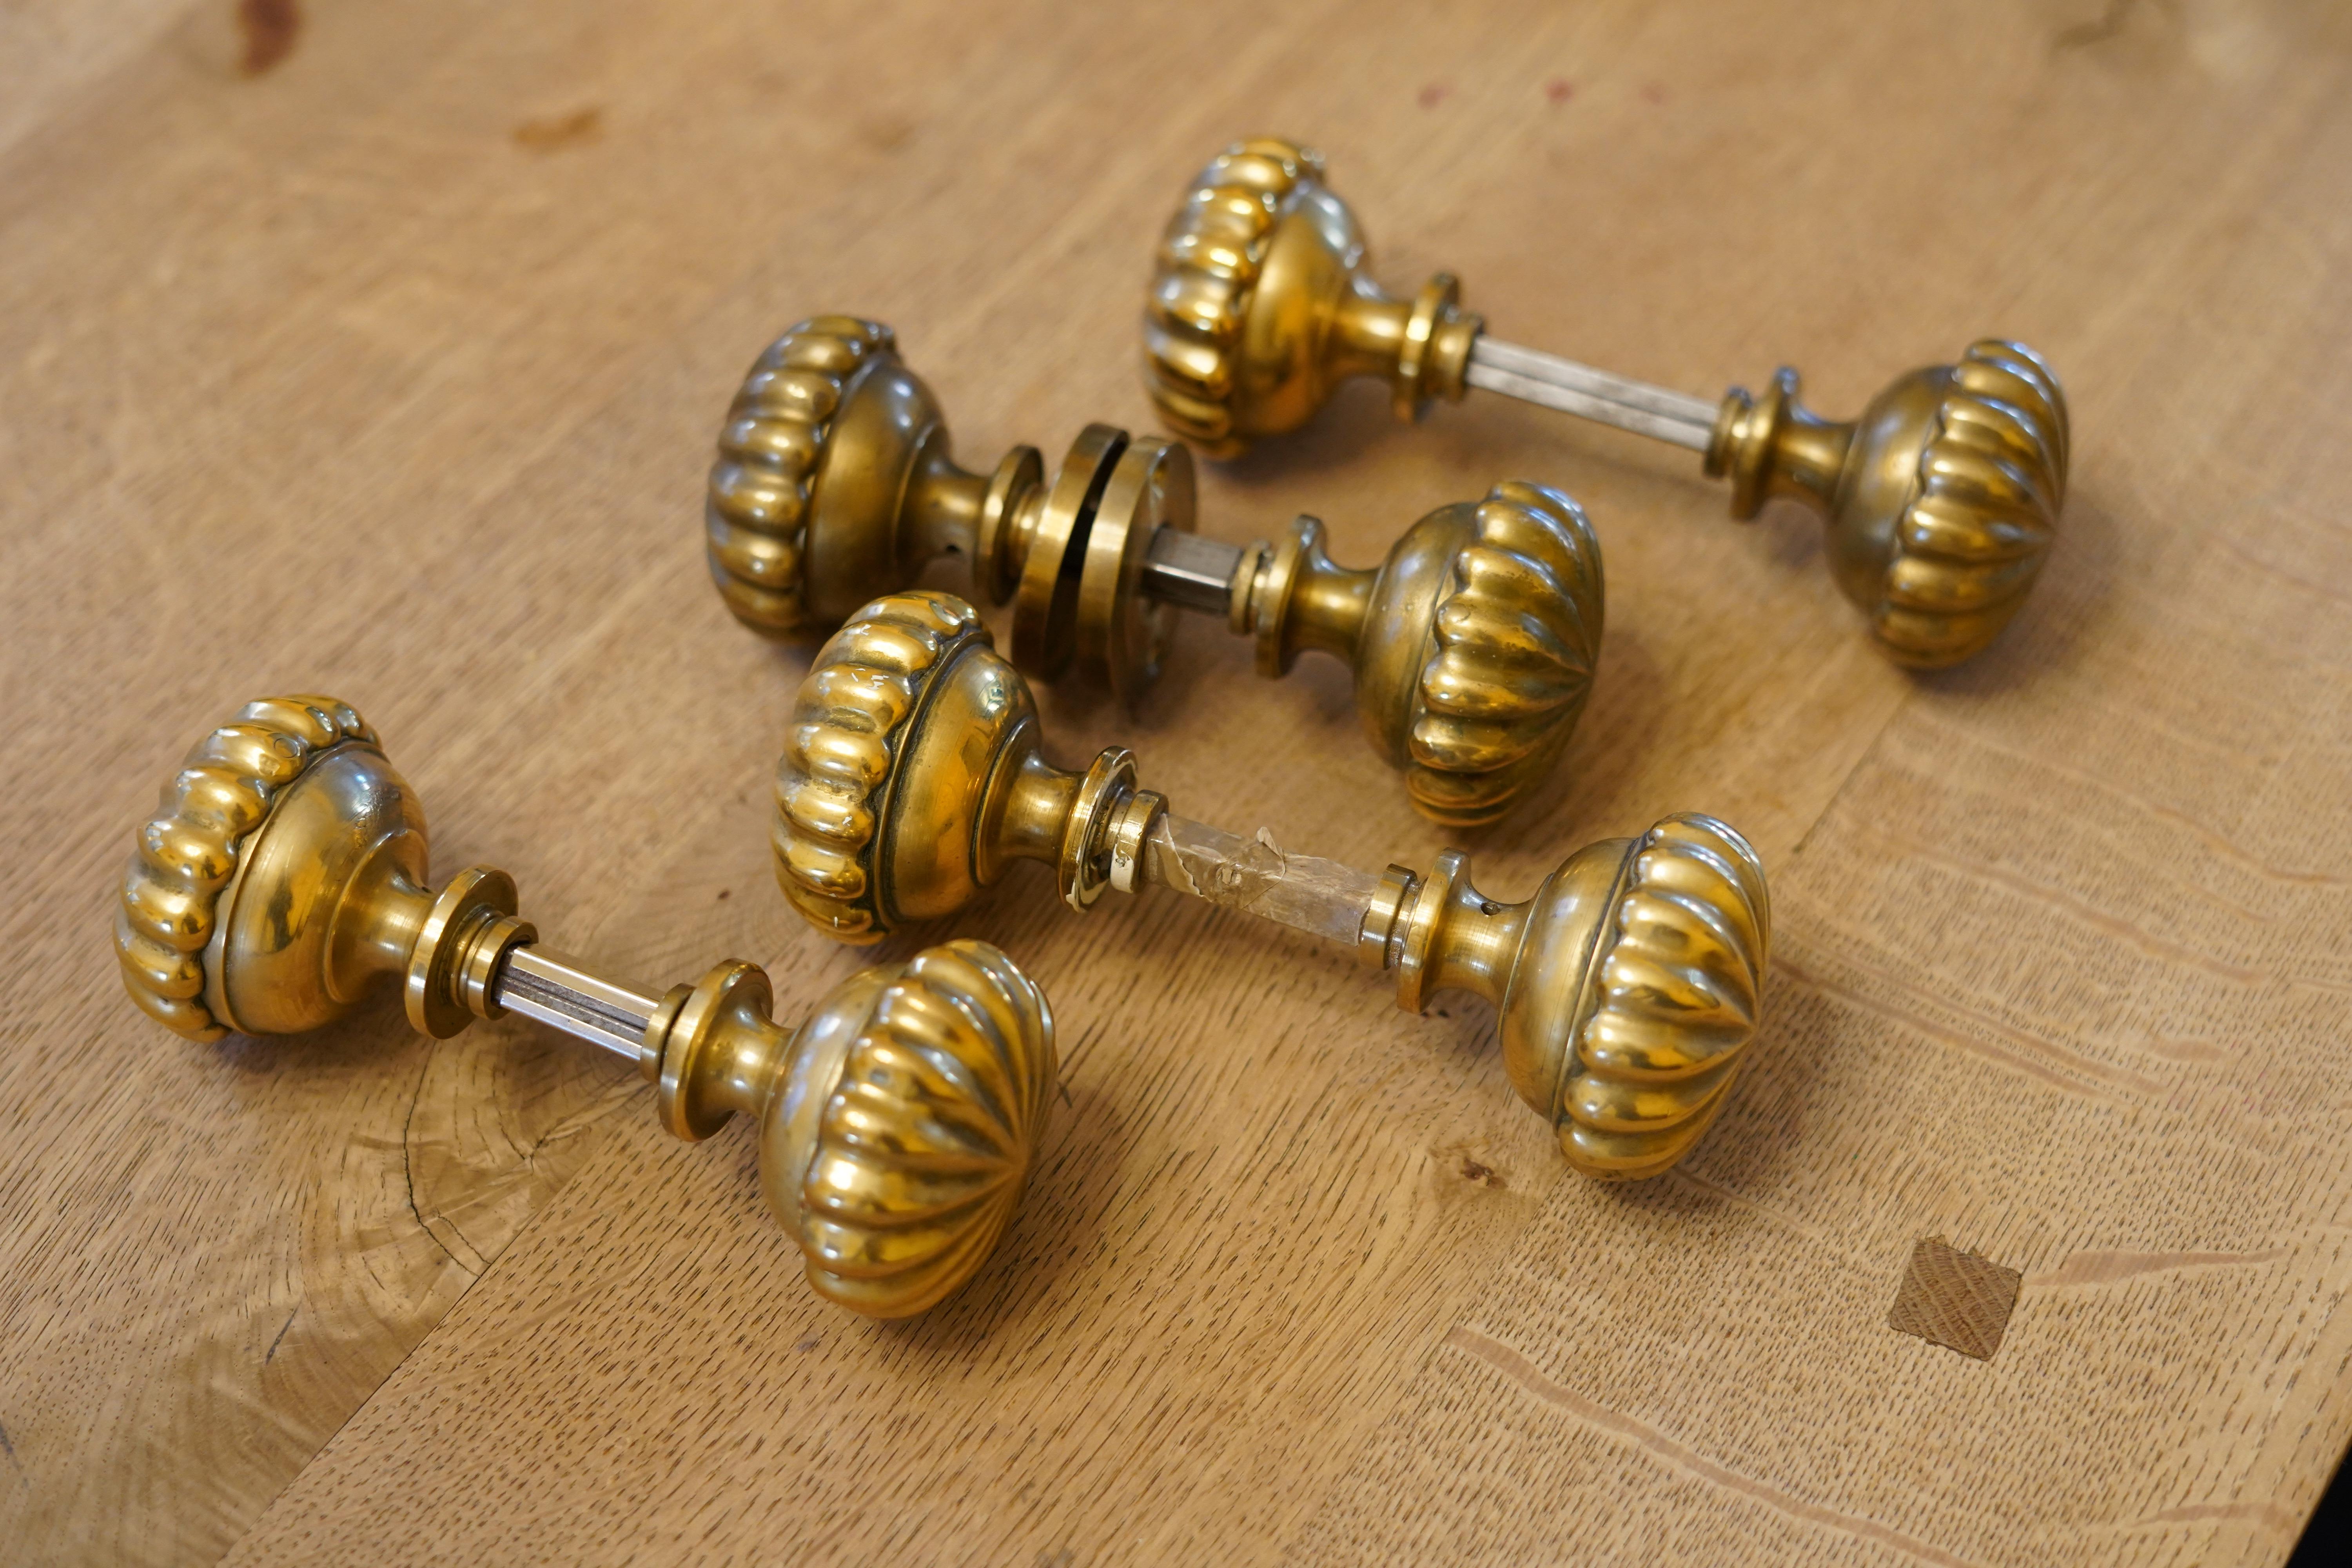 Four Italian brass door handles from the 1940s, comes with plates for keyshole.